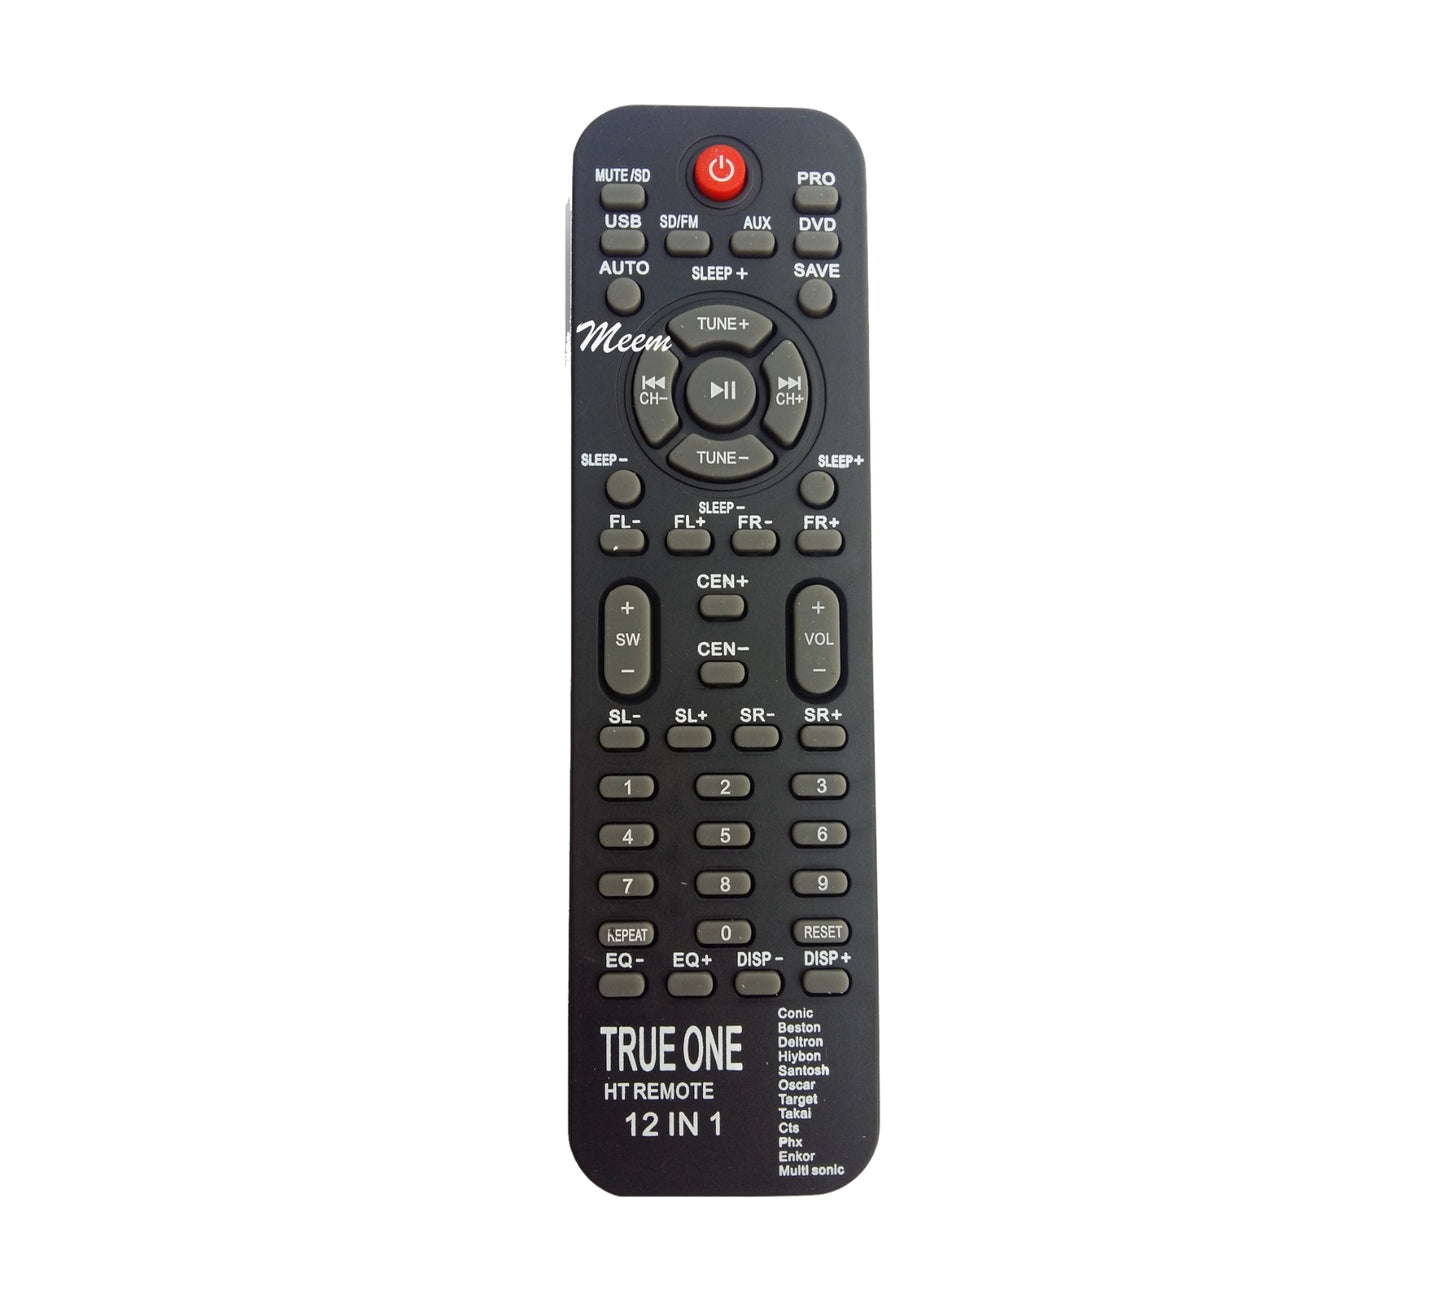 12 in 1 Home Theater Remote Control Suitable forPhx, Enkor, Multisonic (HM05) - Faritha